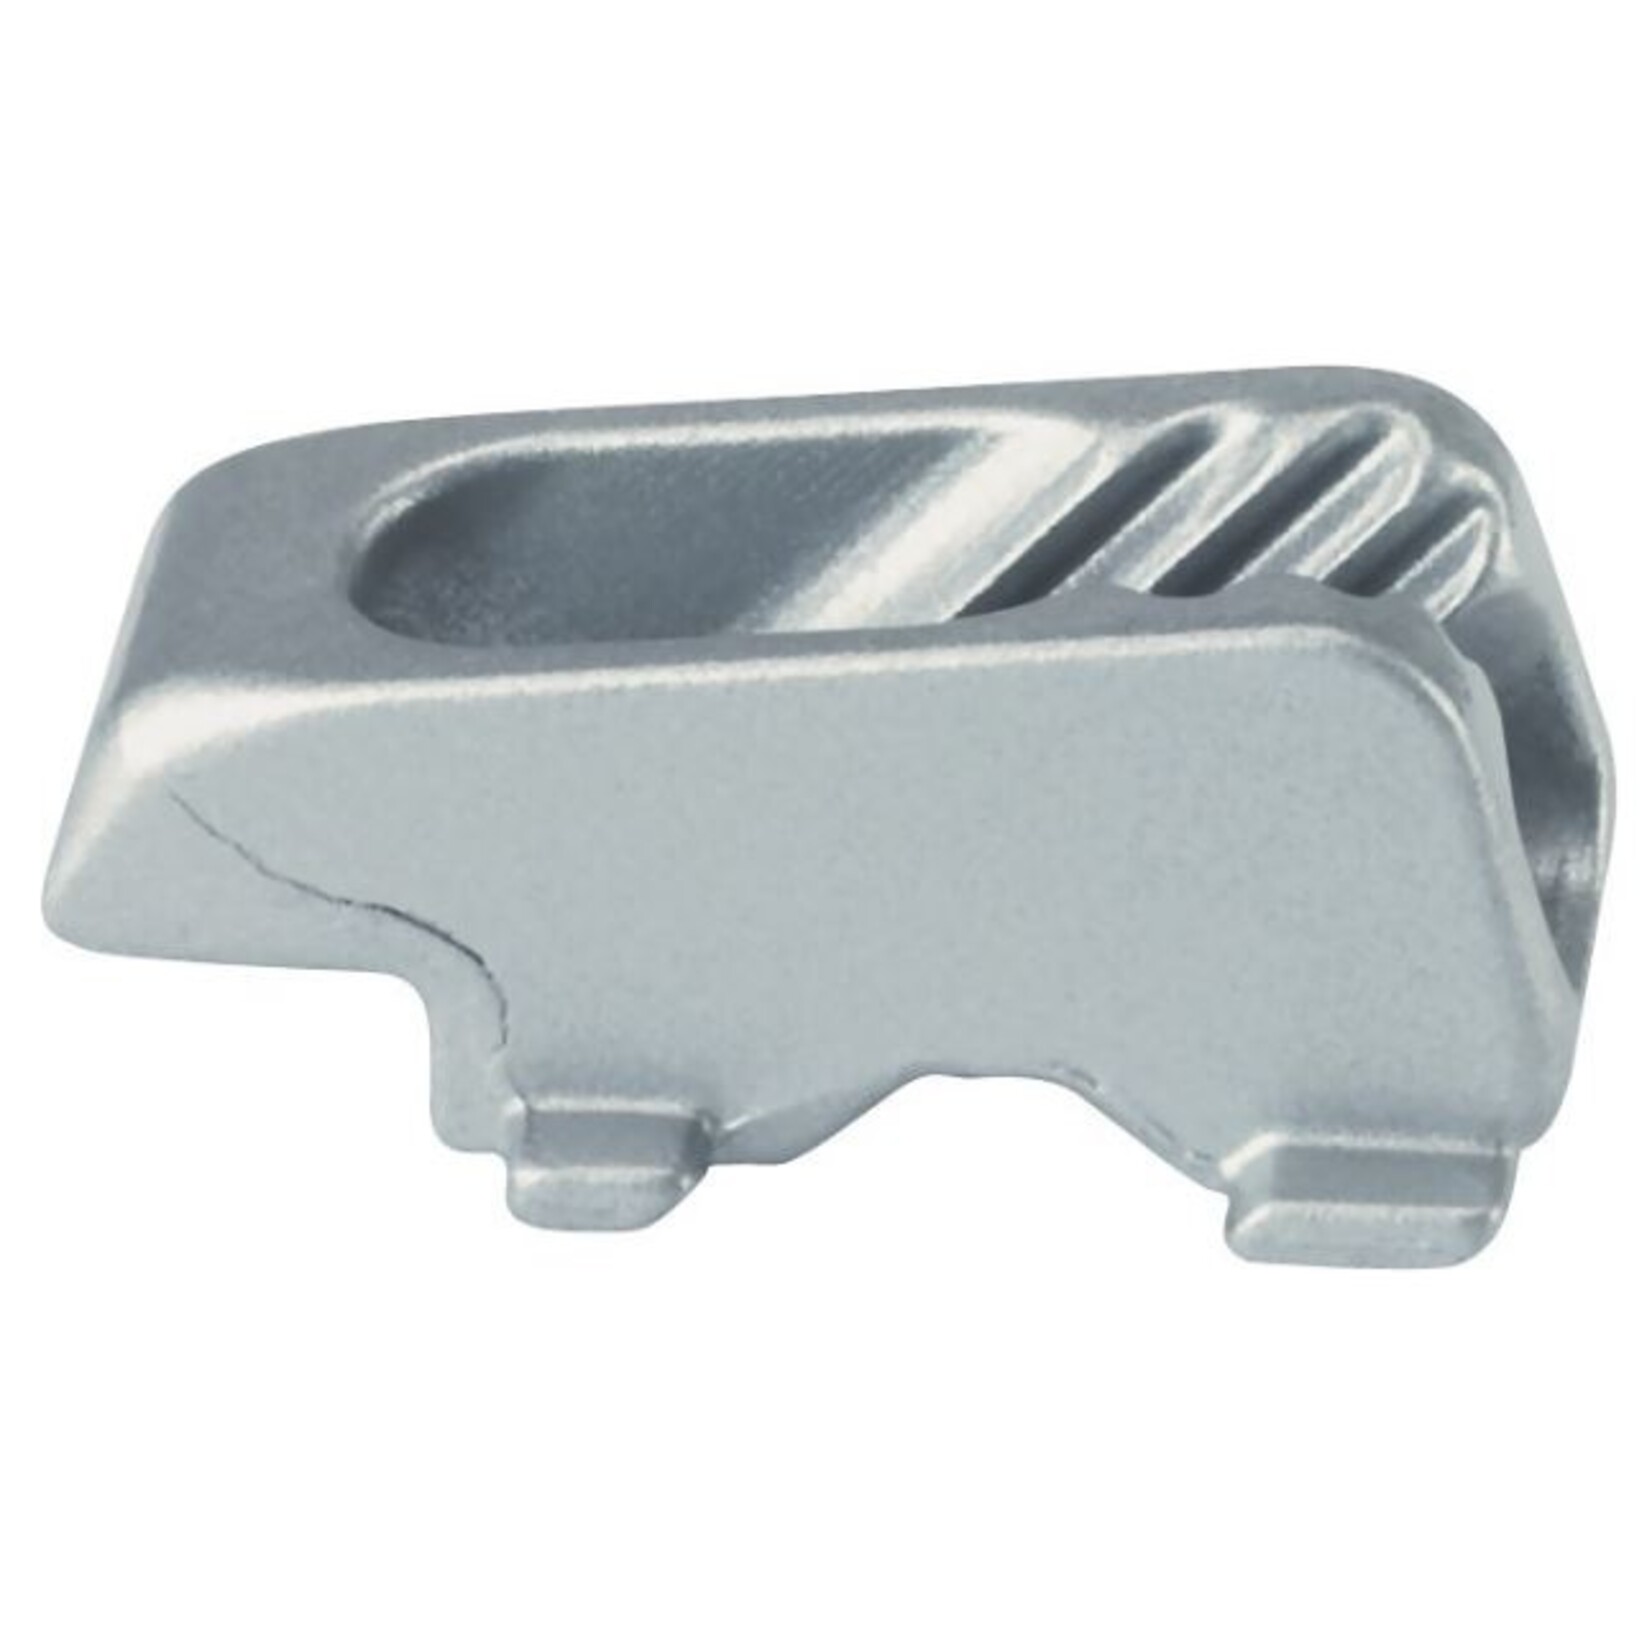 Plastimo Windsurfing cleat cl244